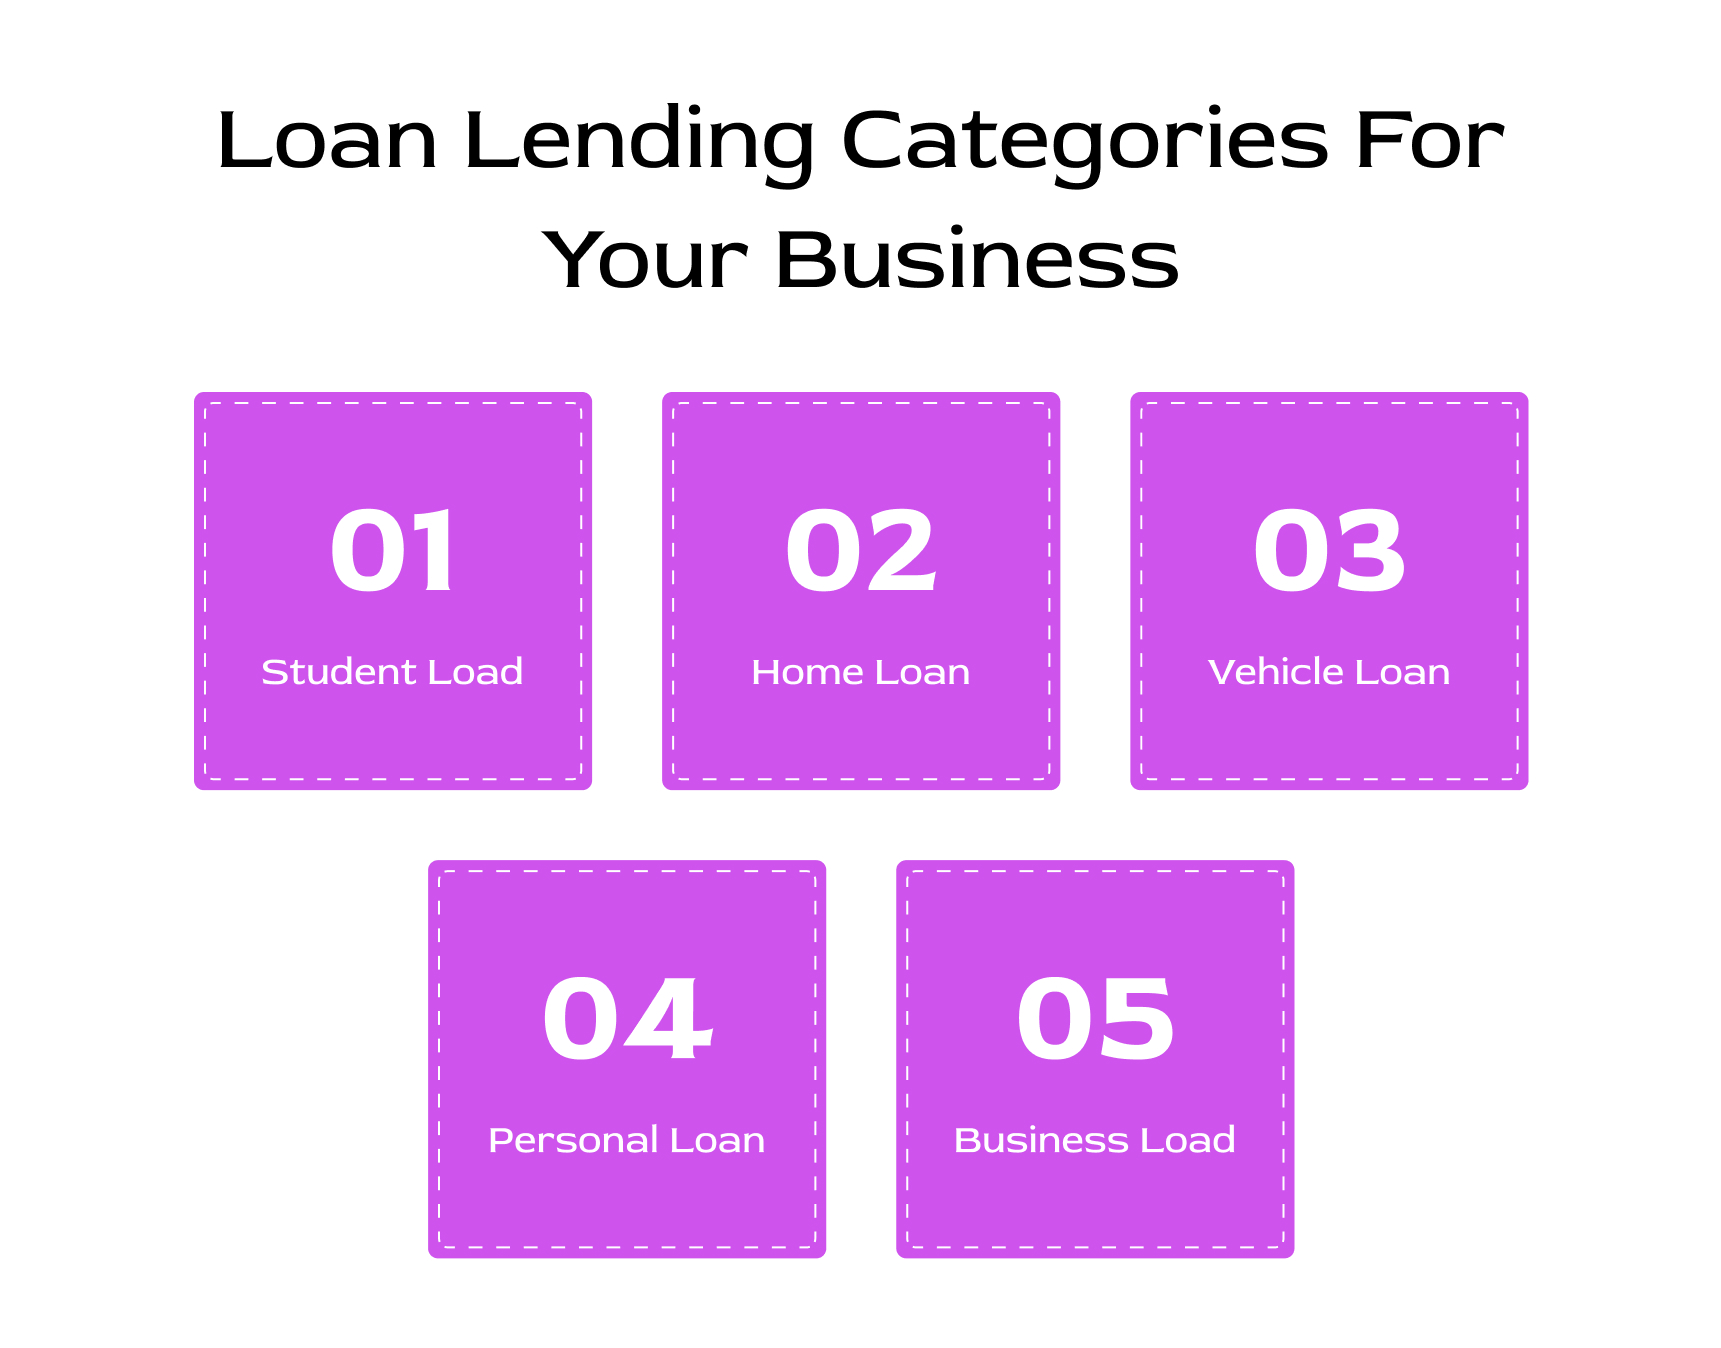 Loan Lending Categories For Your Business